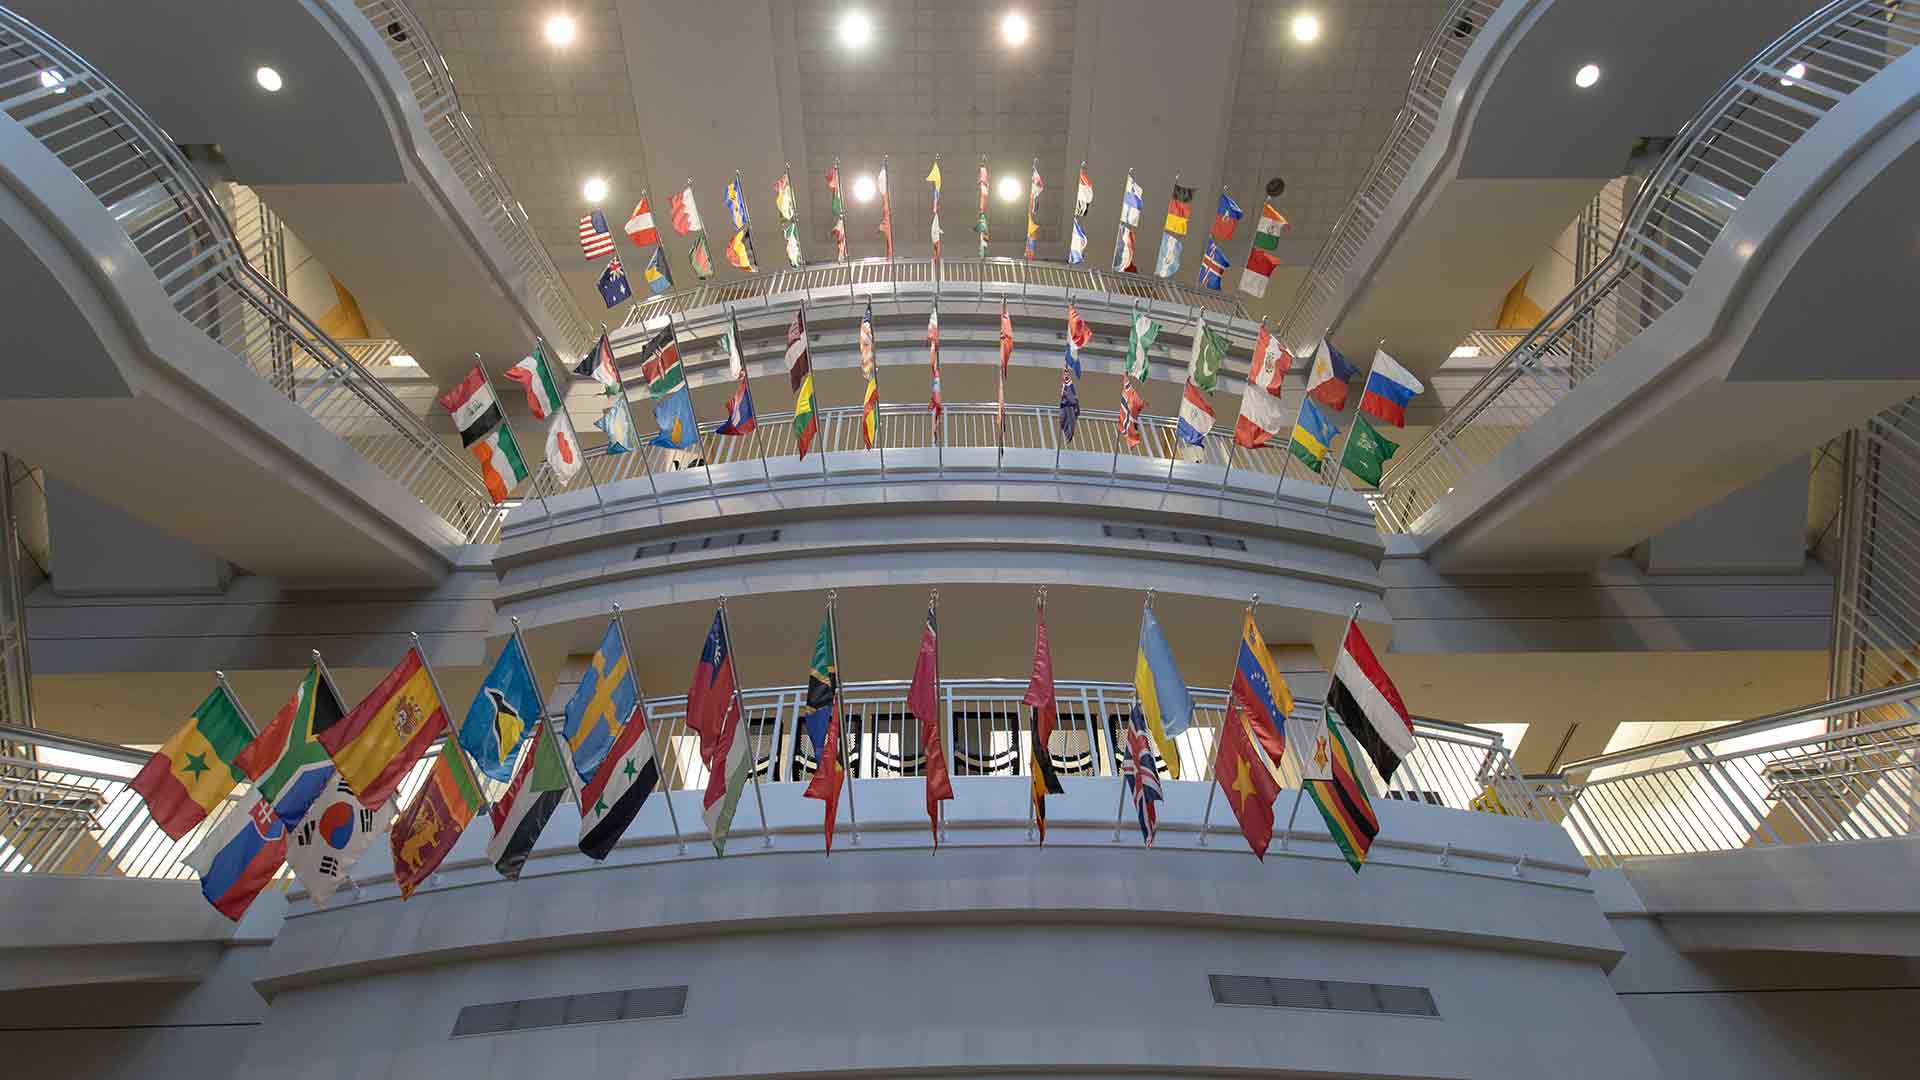 International flags displayed in Strong Hall.